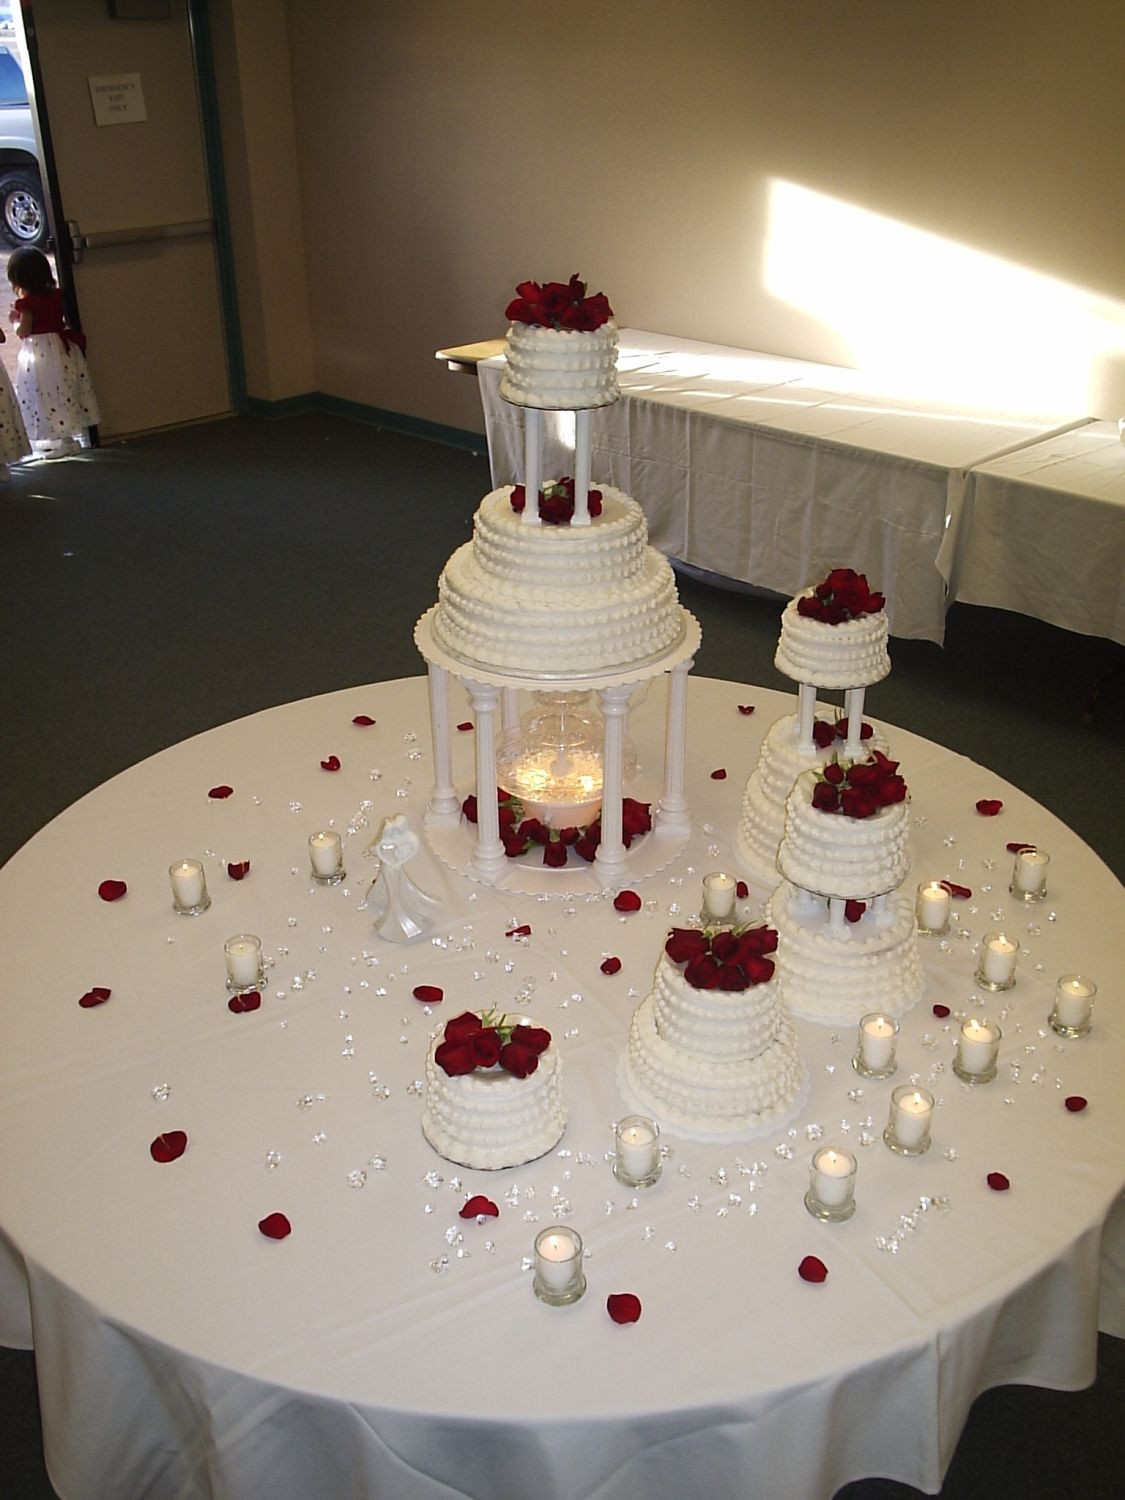 Wedding Cakes With Water Fountain
 Wedding Cakes With Fountains – WeNeedFun